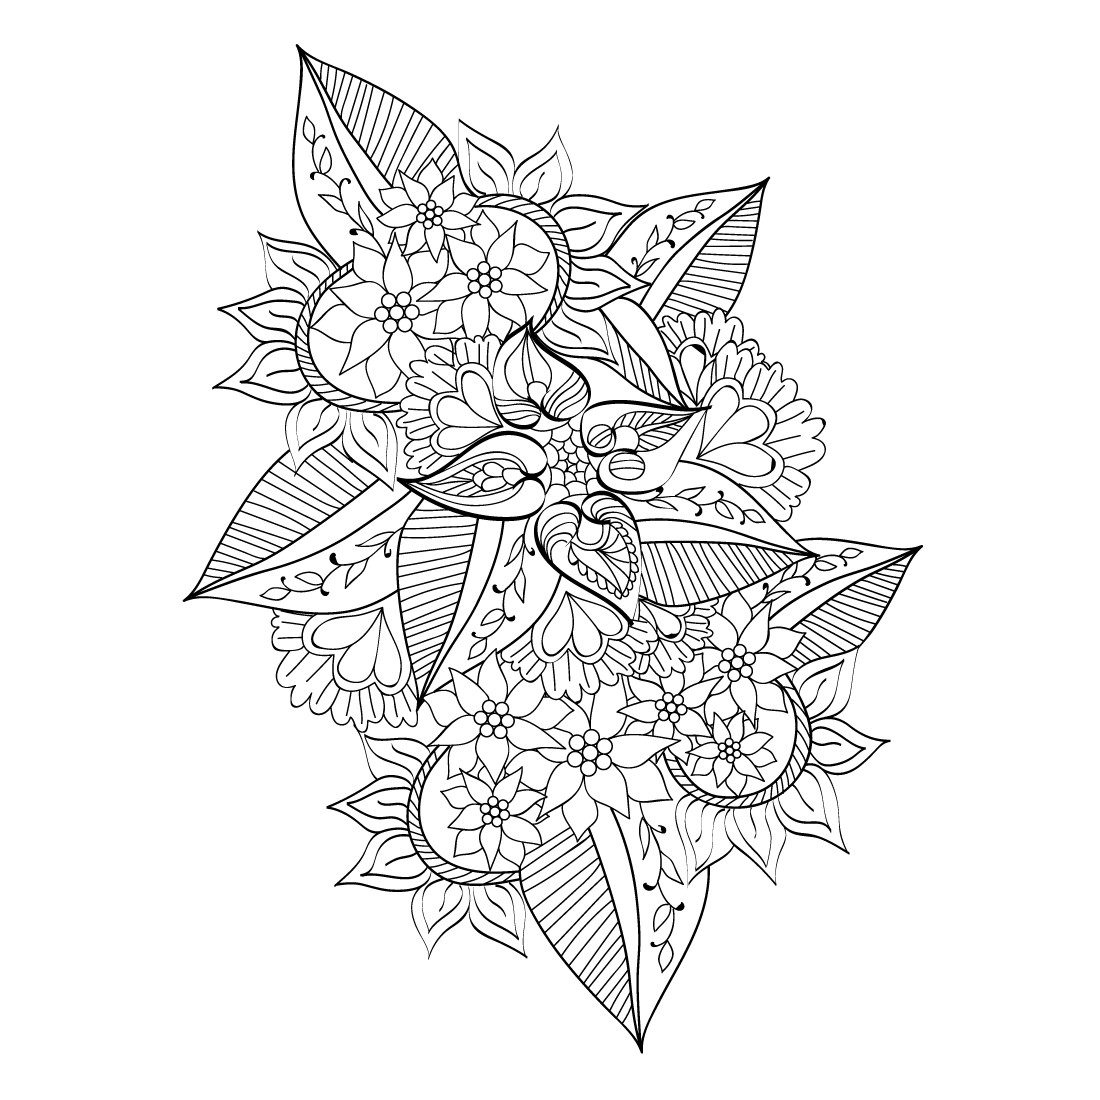 Black and white drawing of a bouquet of flowers.